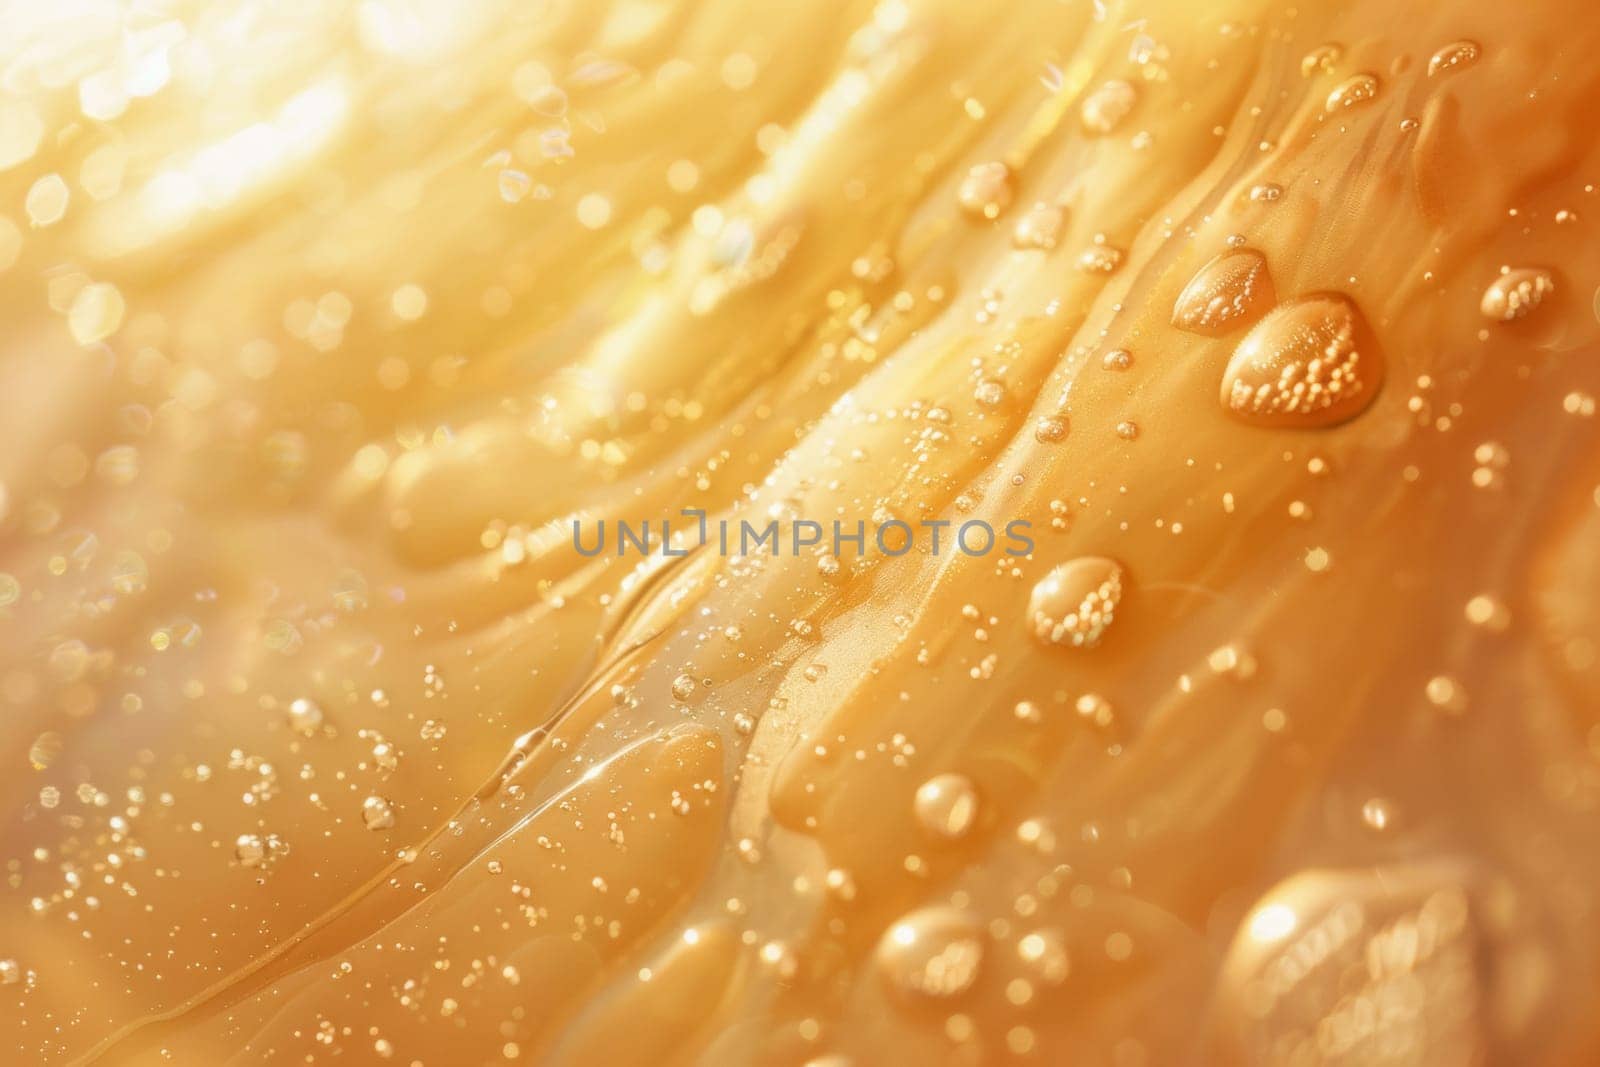 Macro photography captures the abstract beauty of water droplets on a surface bathed in a warm, golden hue.